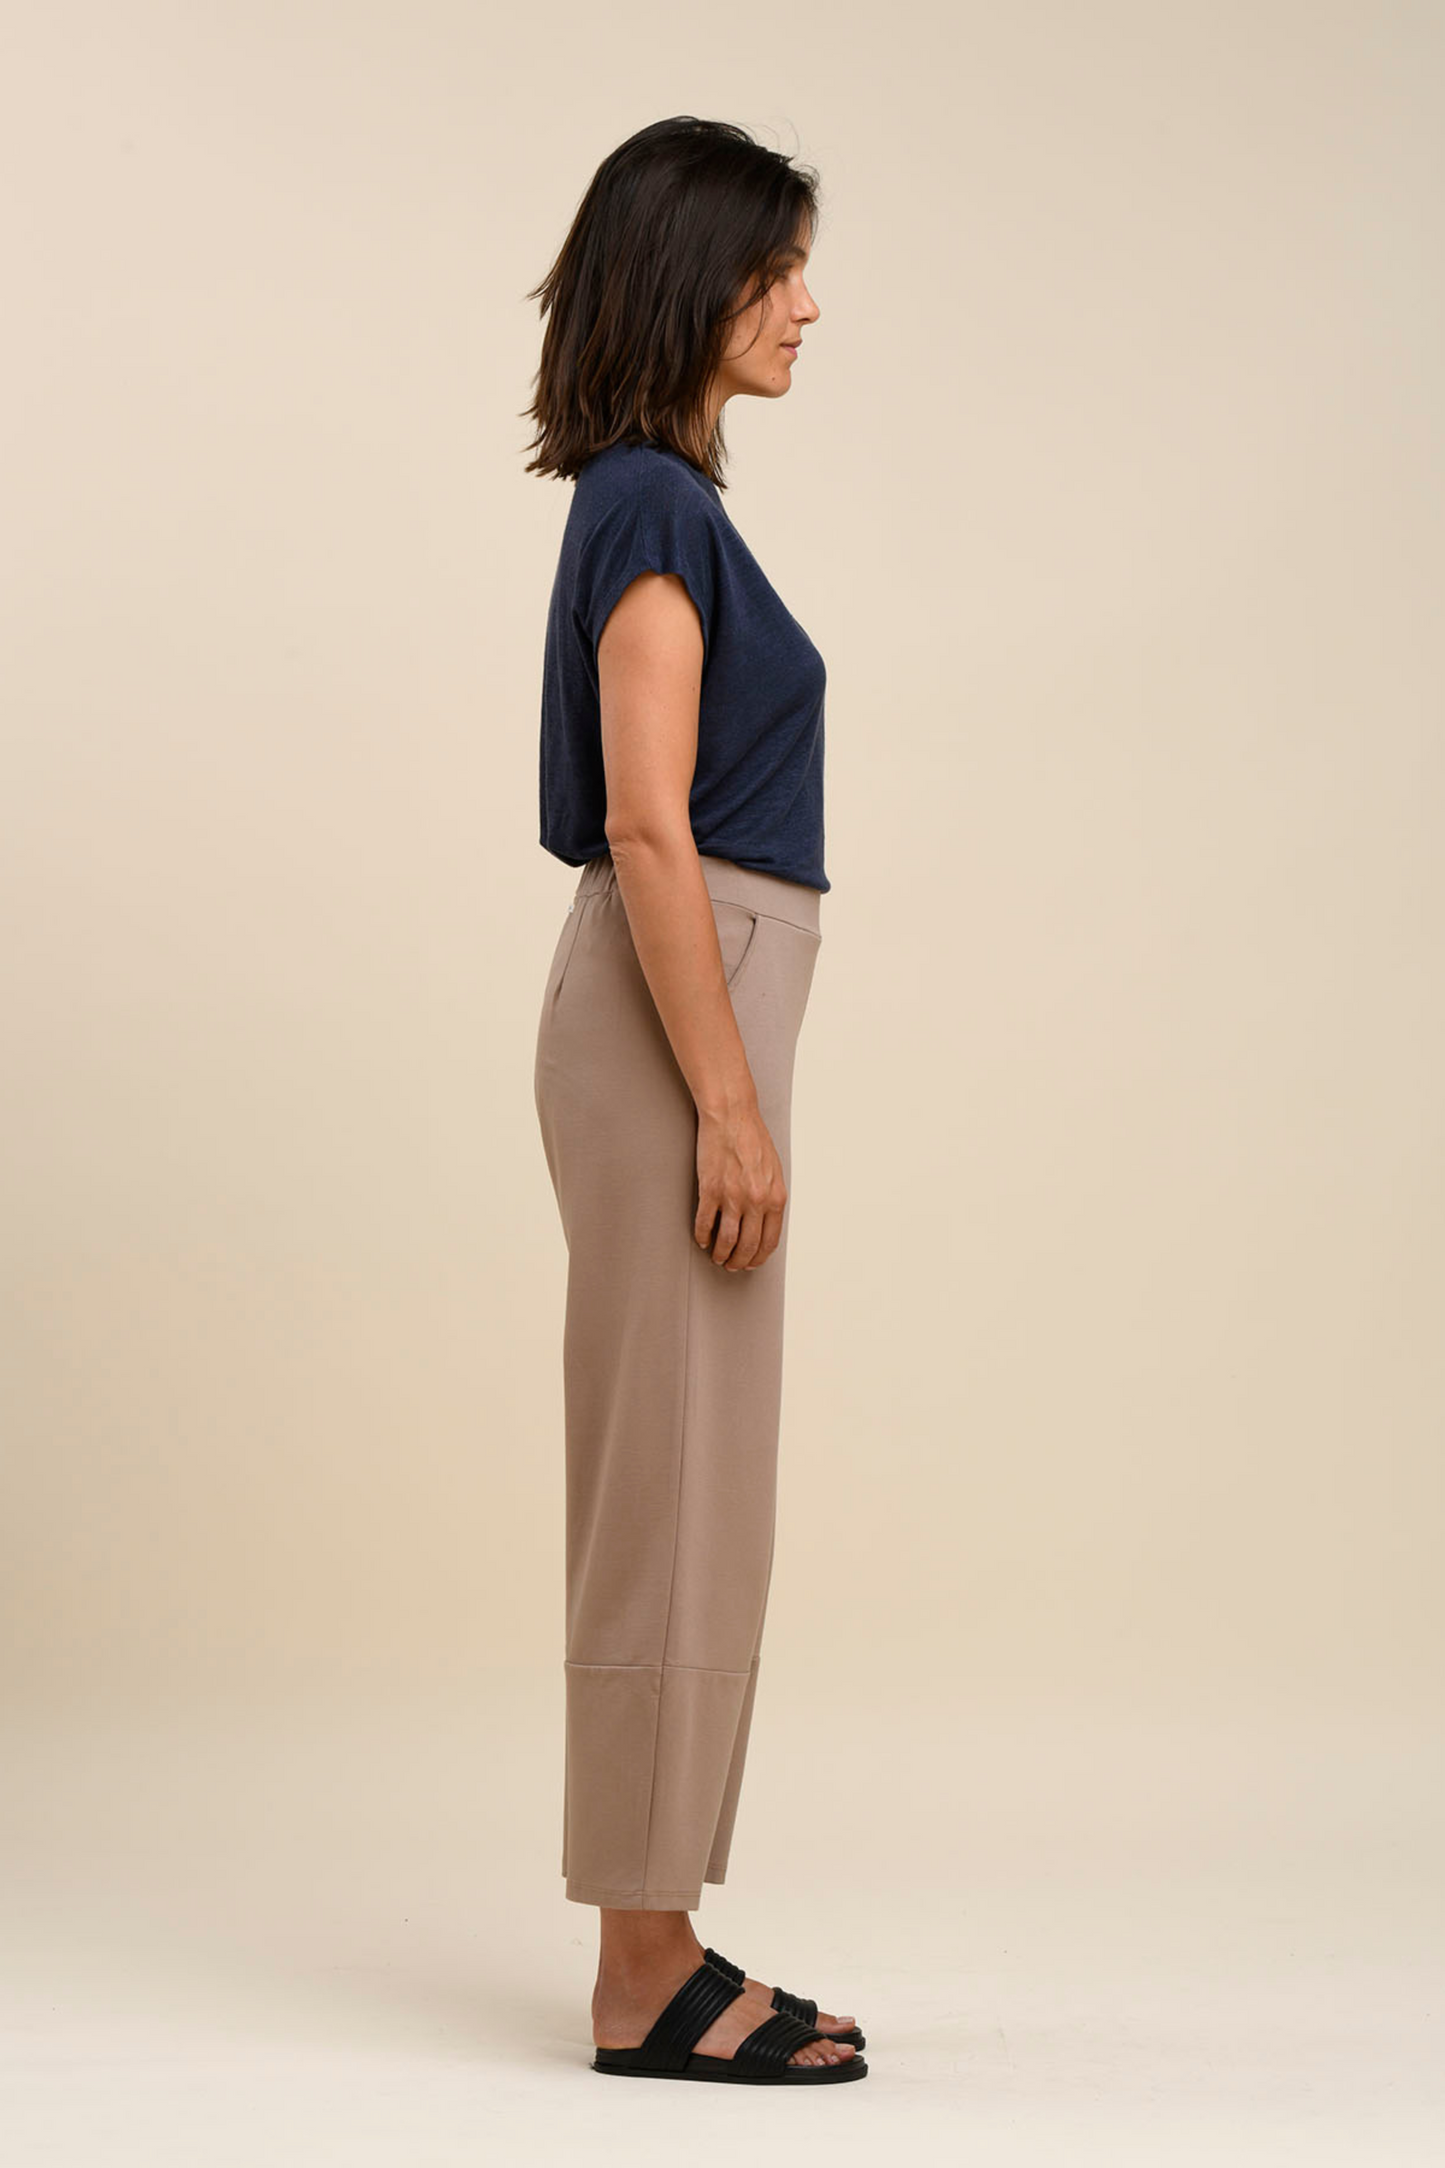 Humility  - Unia Pants in Taupe